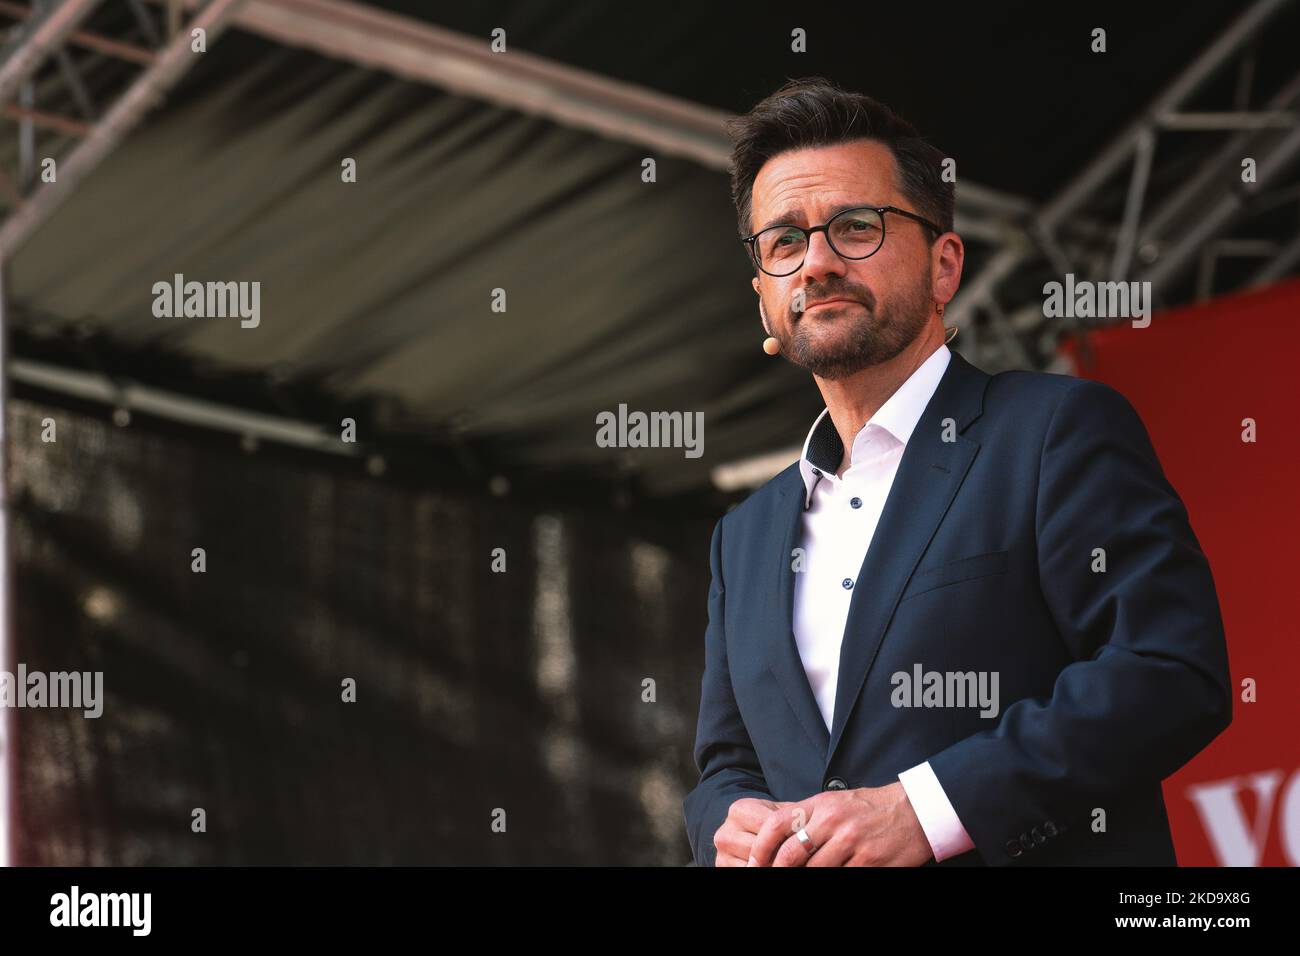 Thomas Kutschaty, the top candidate for SPD party speaks on the stage at Roncalliplatz in Cologne, Germany on May 13 during the SPD party state election campaign 2022 (Photo by Ying Tang/NurPhoto) Stock Photo